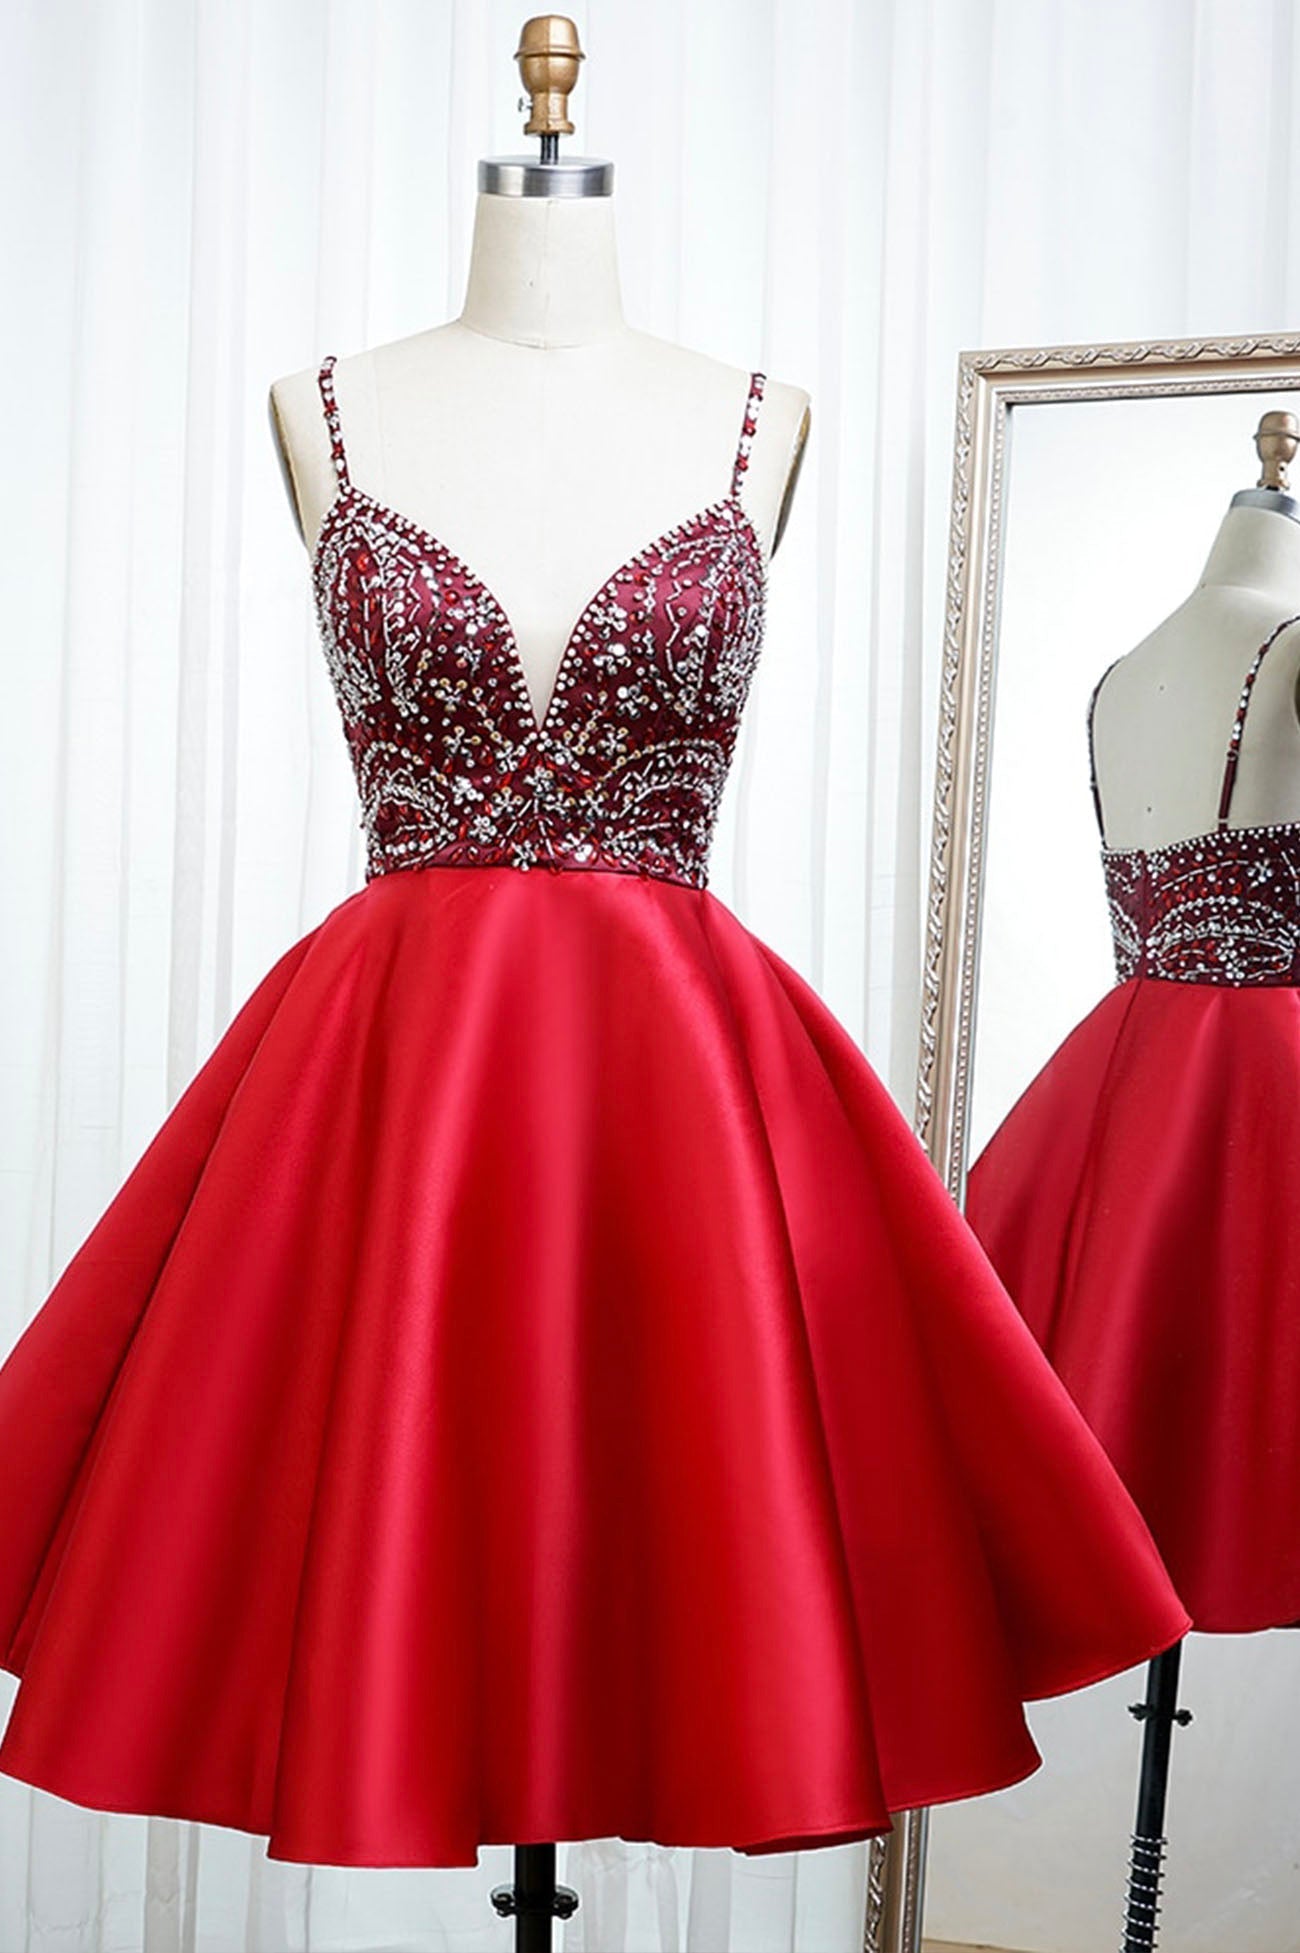 Red Satin Beading Short Prom Dresses, A-Line Homecoming Dresses